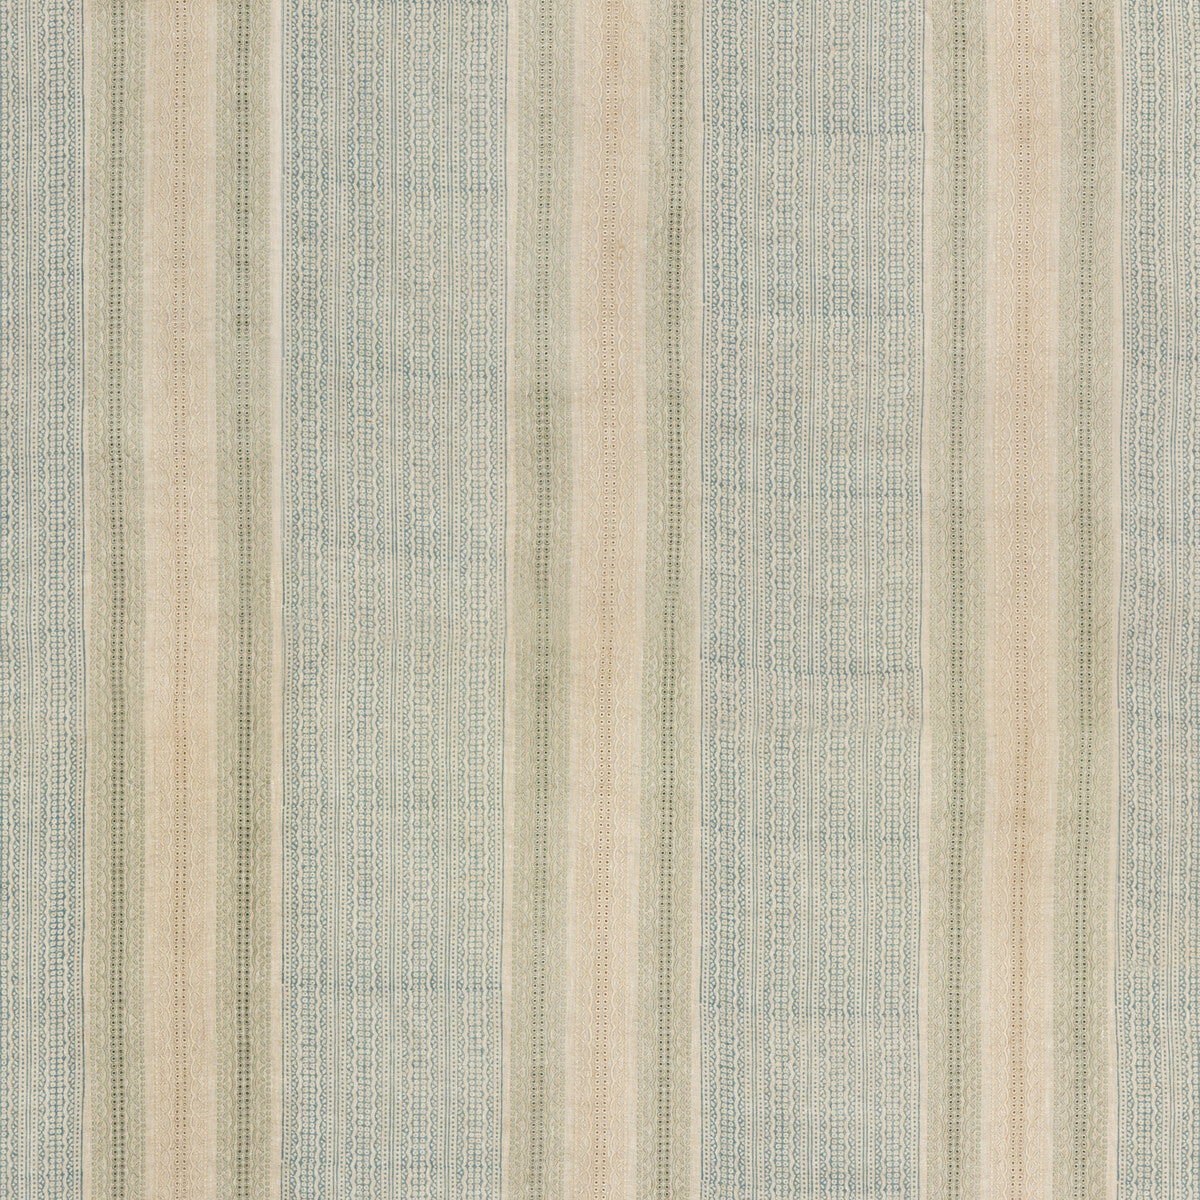 Millbrook fabric in aqua color - pattern BP10794.1.0 - by G P &amp; J Baker in the Artisan II collection